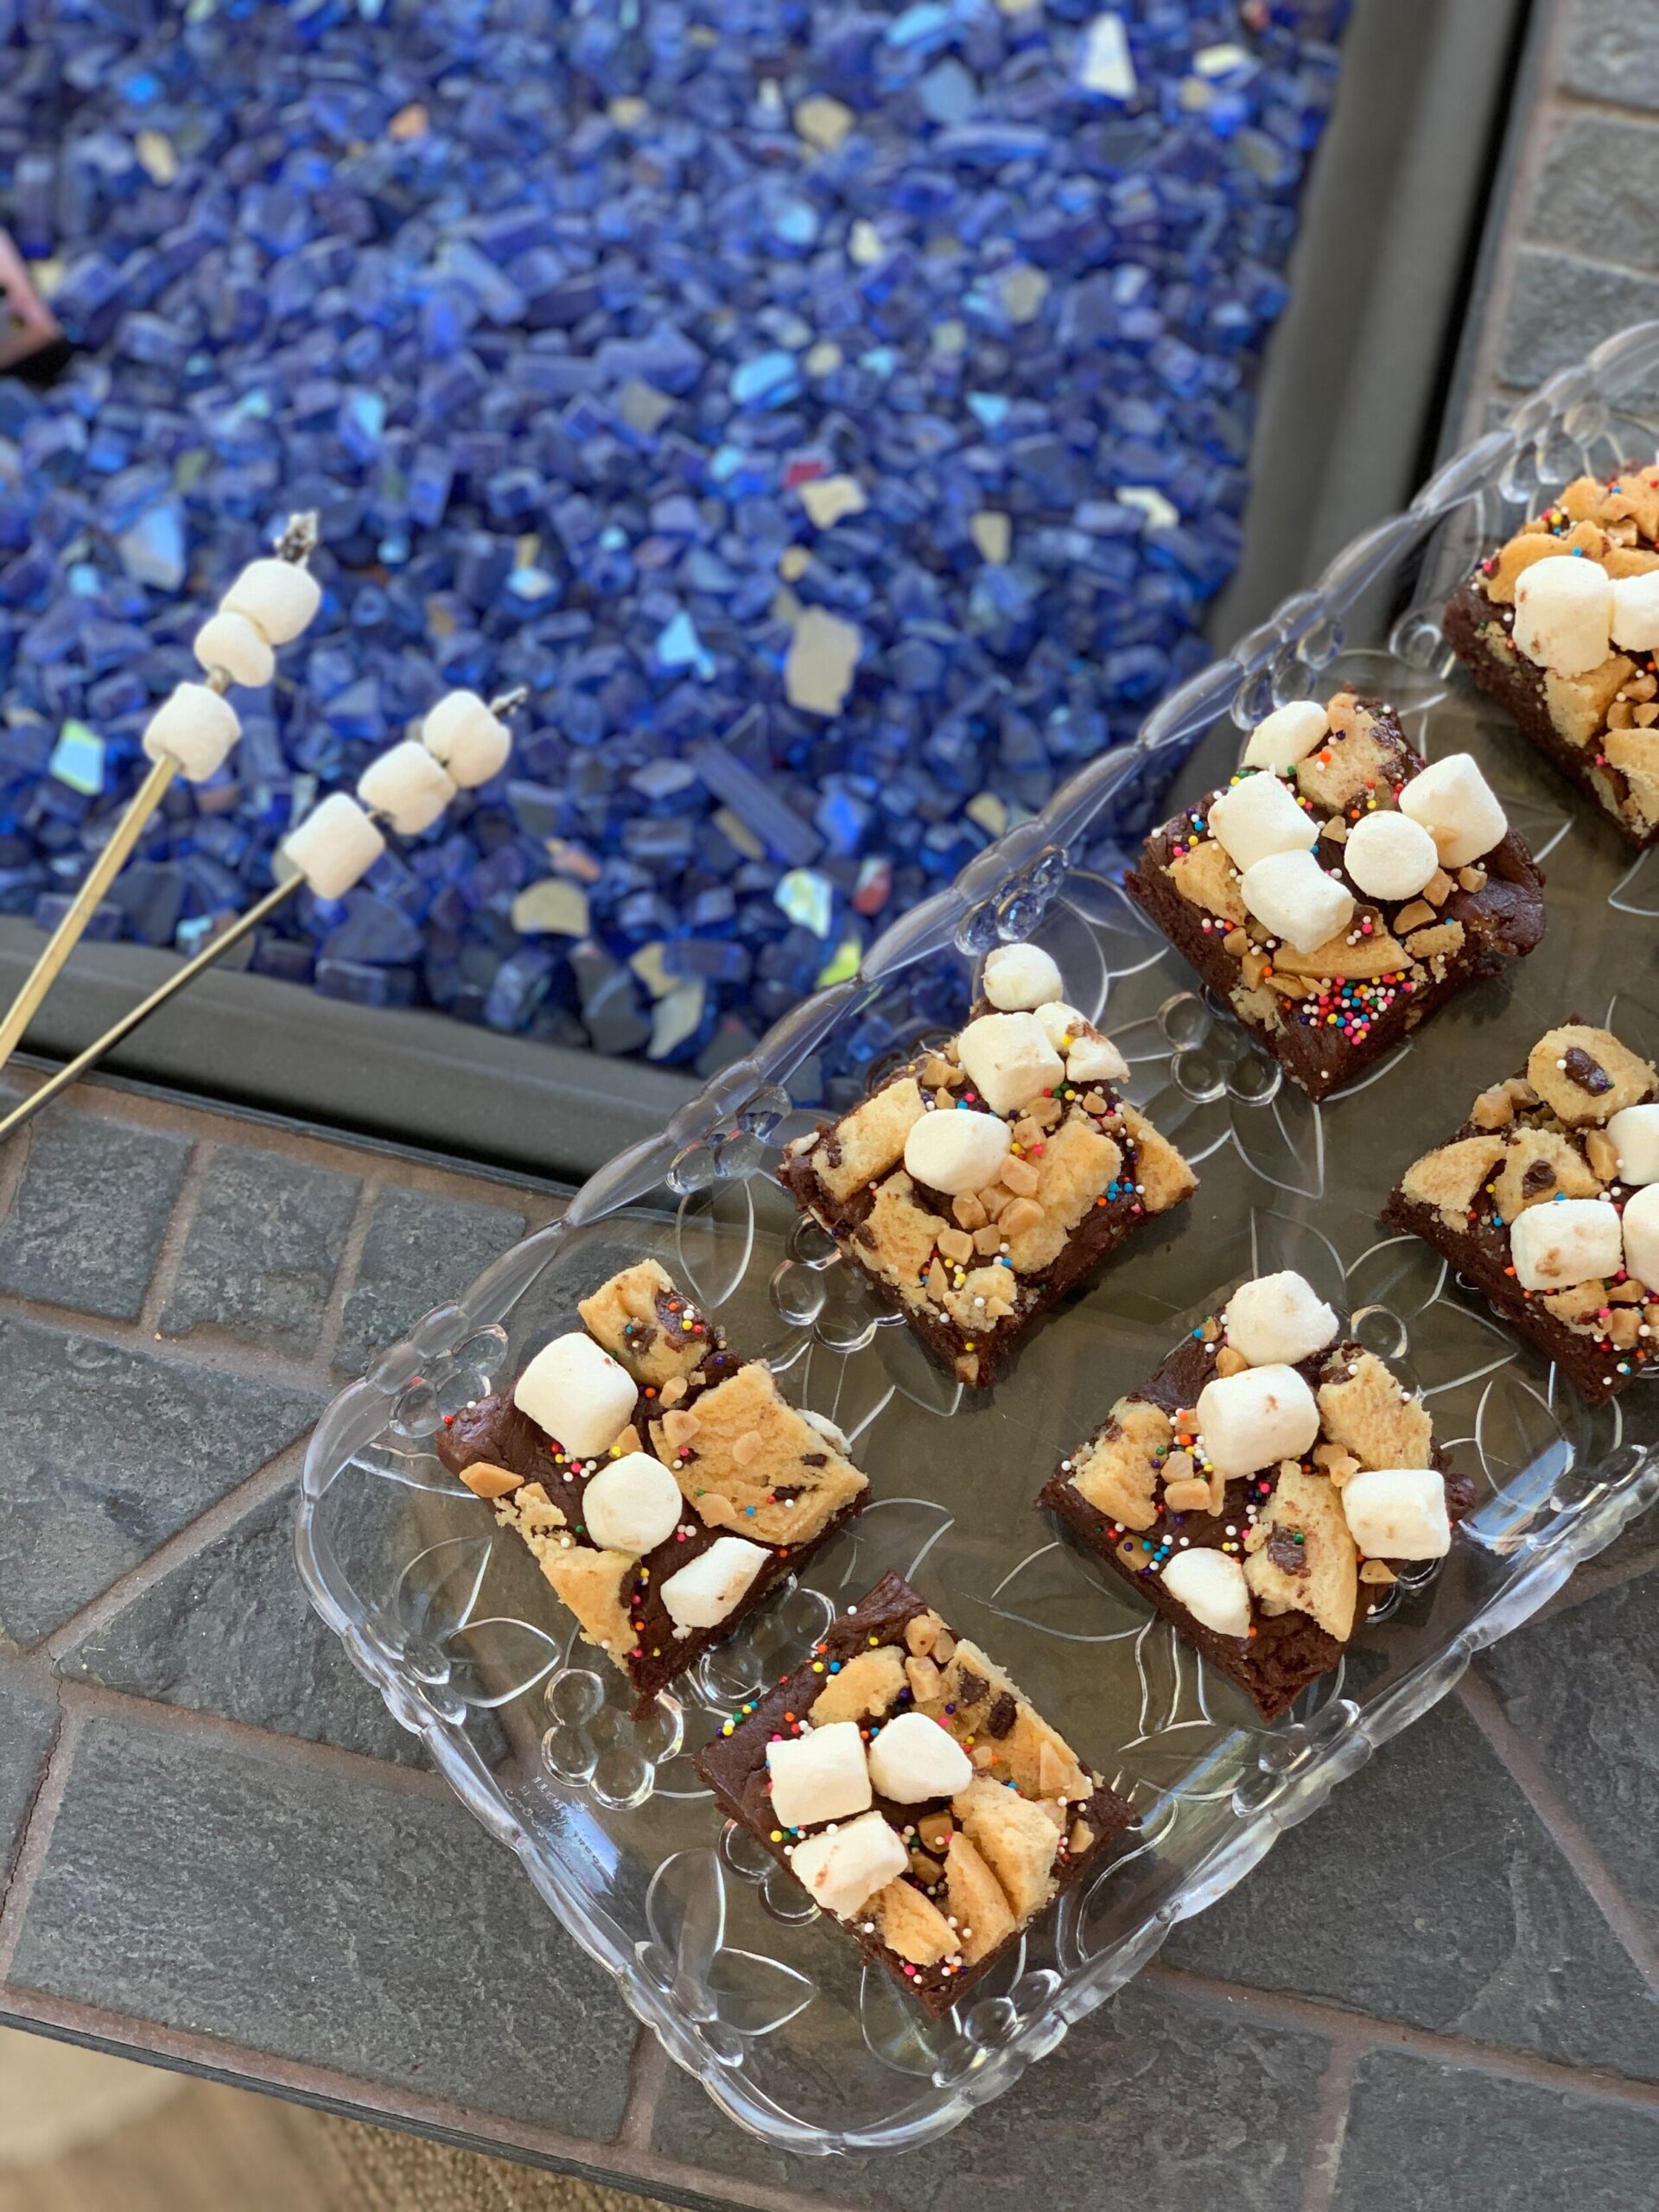 Delicious No-Fire Required S’mores Dessert Bars!